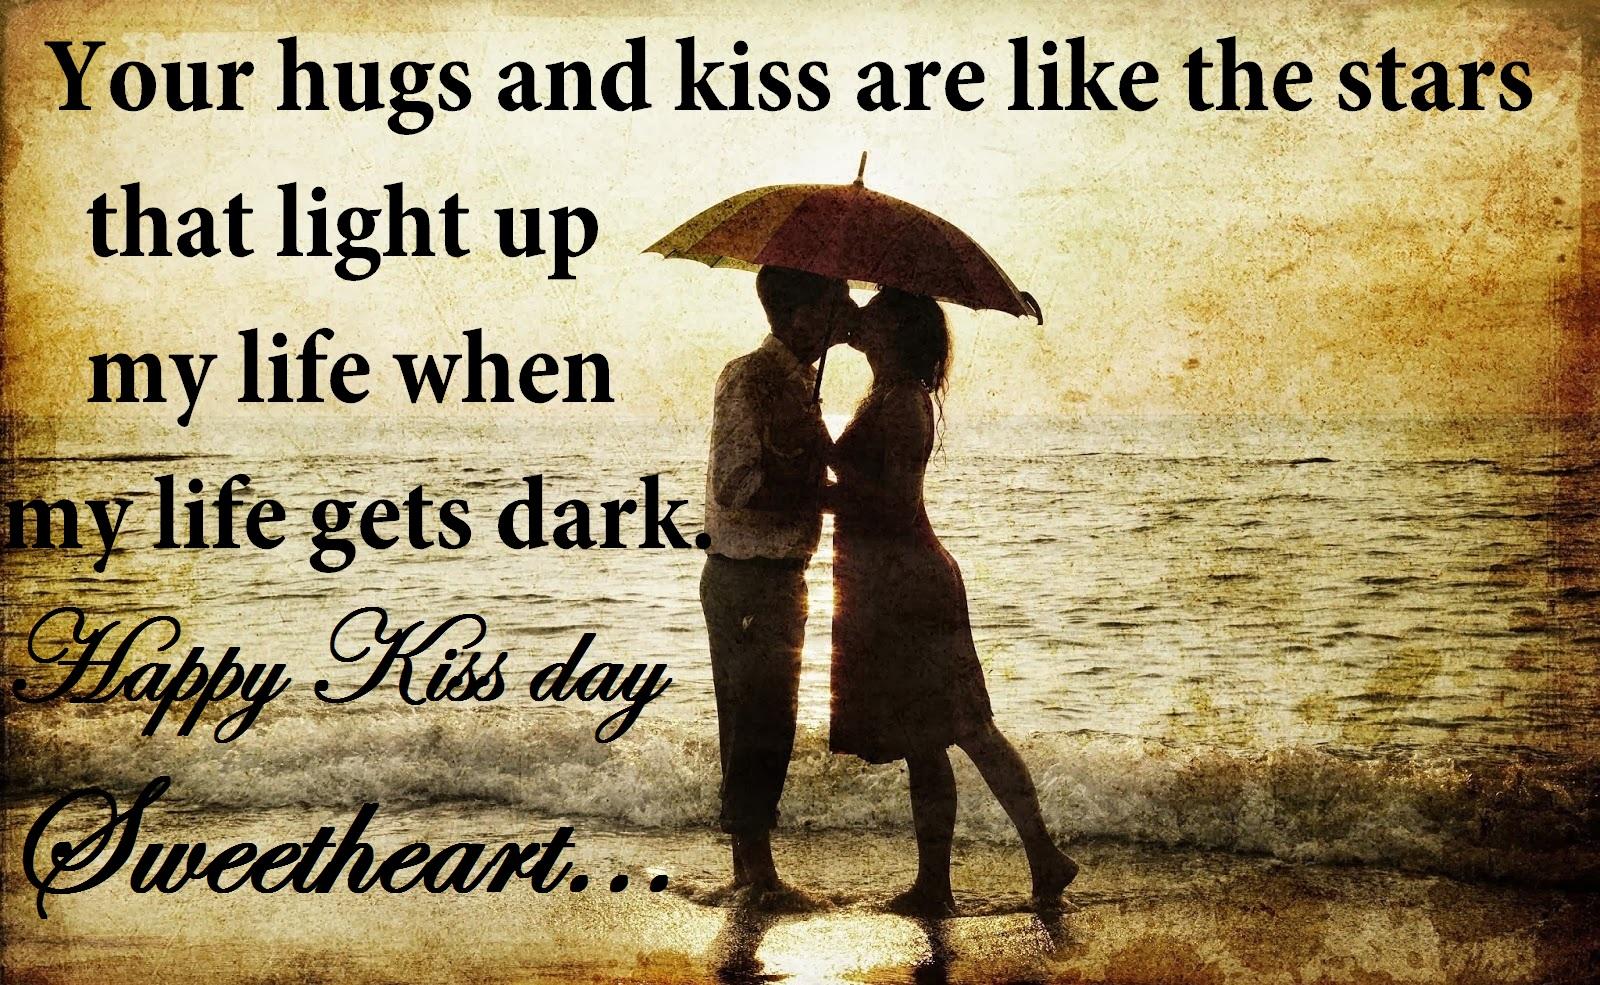 Kiss Day SMS Image Quotes Wallpaper Messages Status. Kiss Day